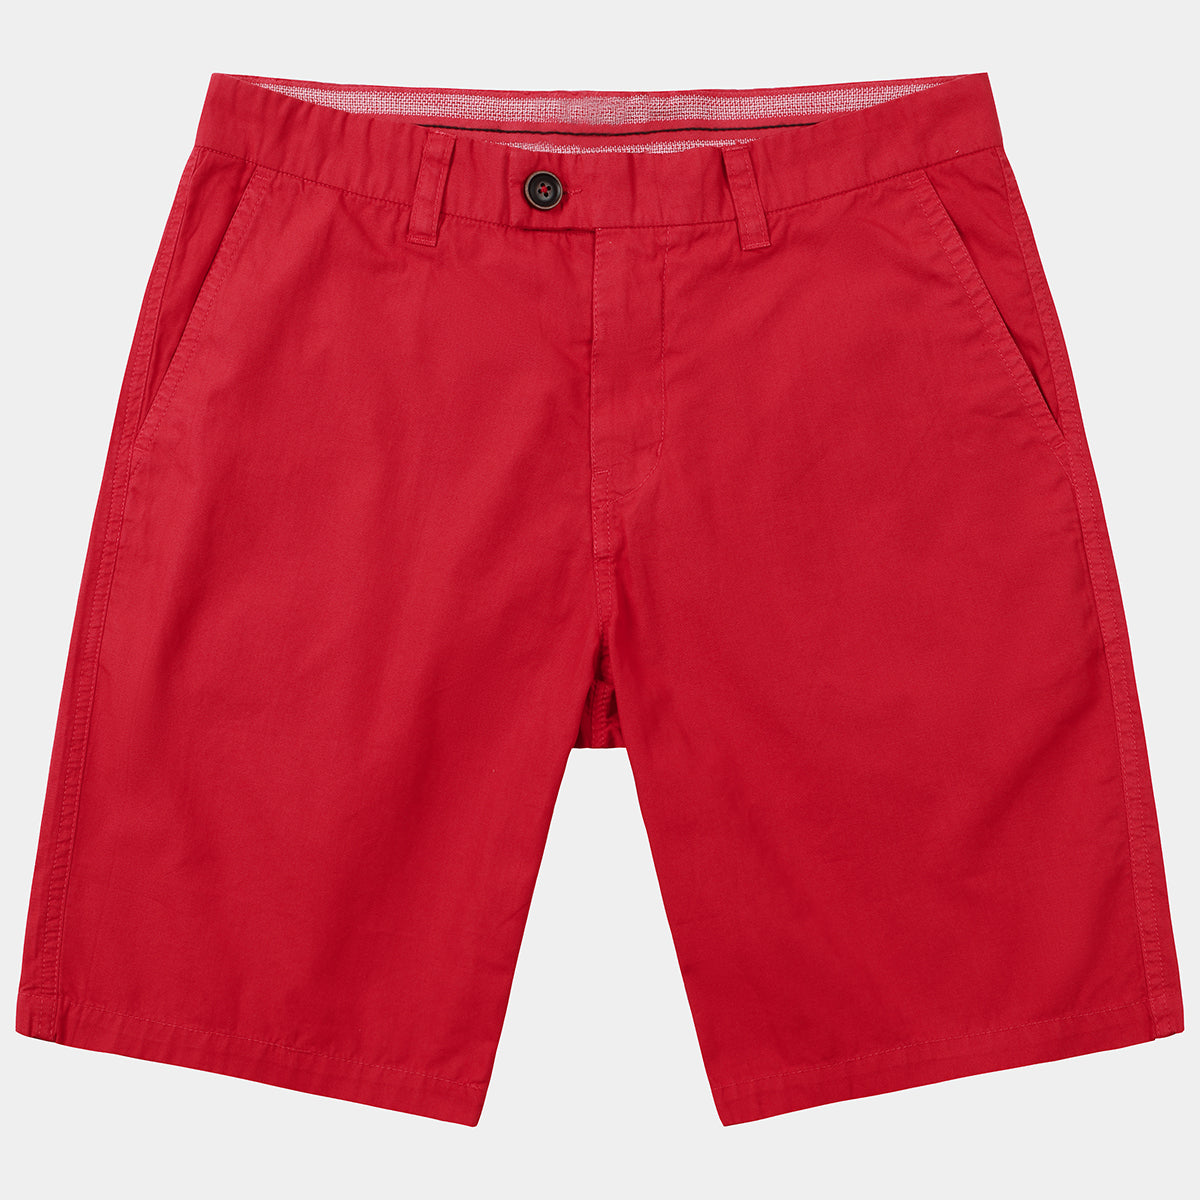 Men's Red Summer Casual Breathable Cotton Chino Shorts